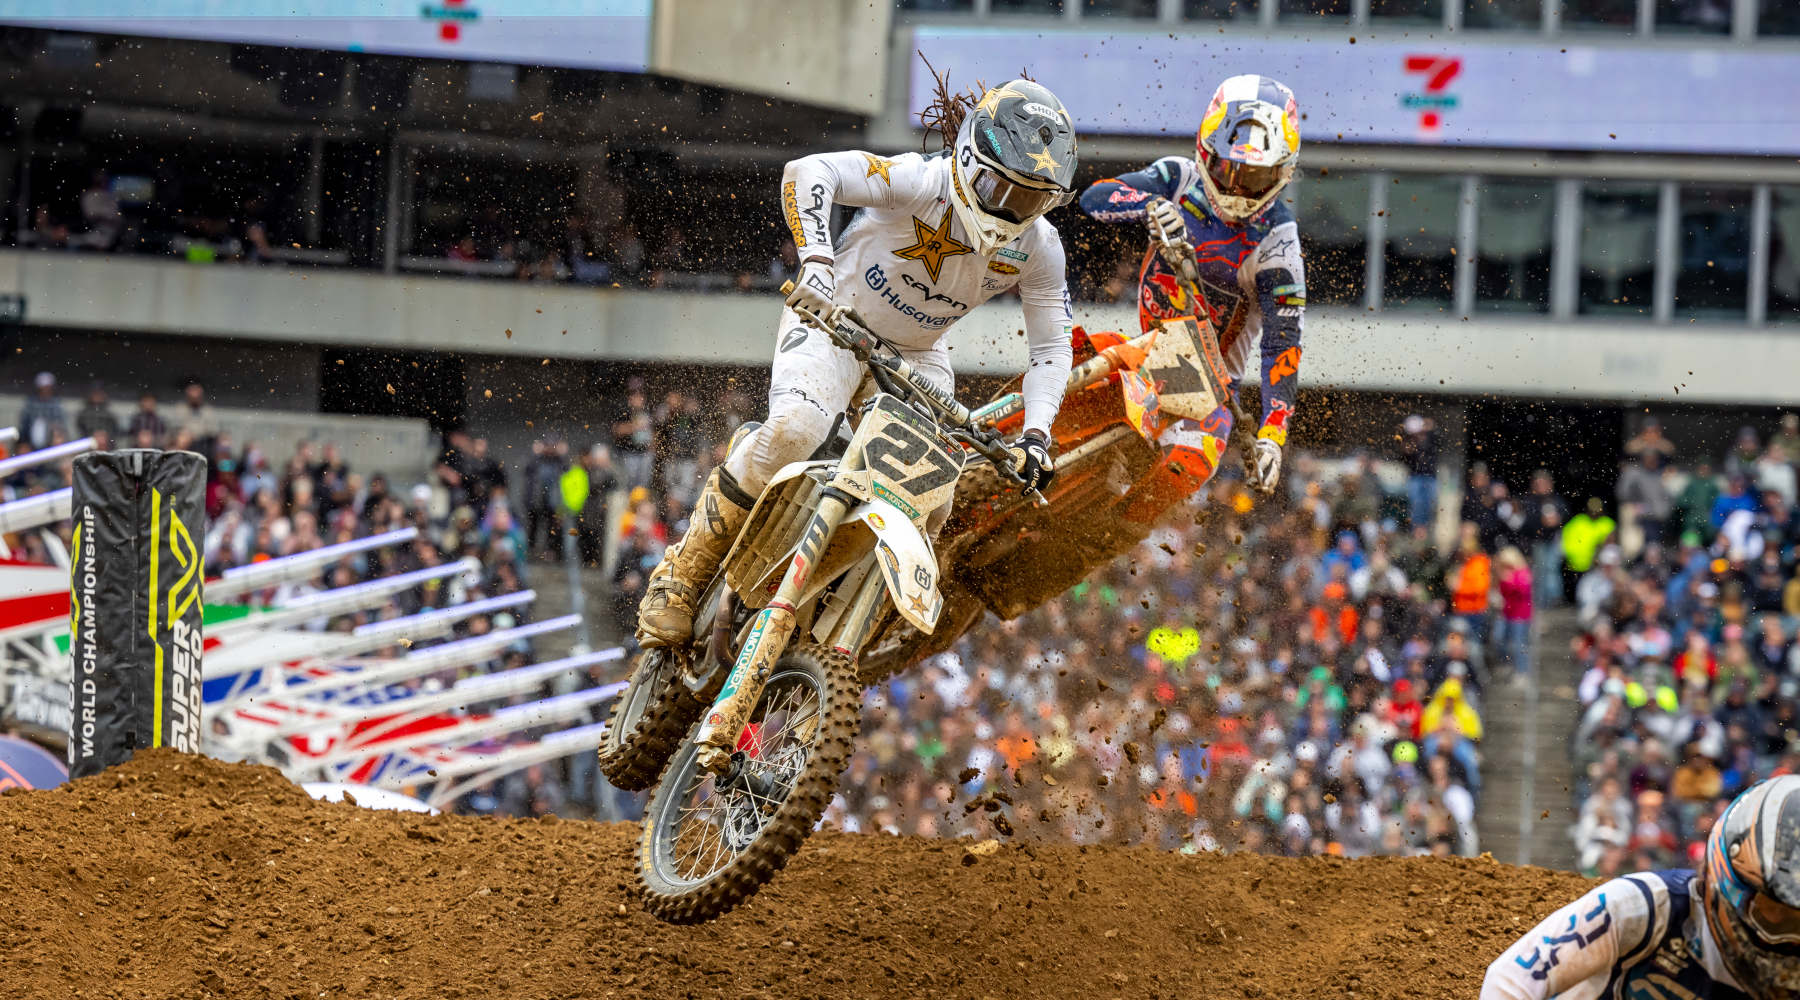 Malcolm Stewart and Chase Sexton